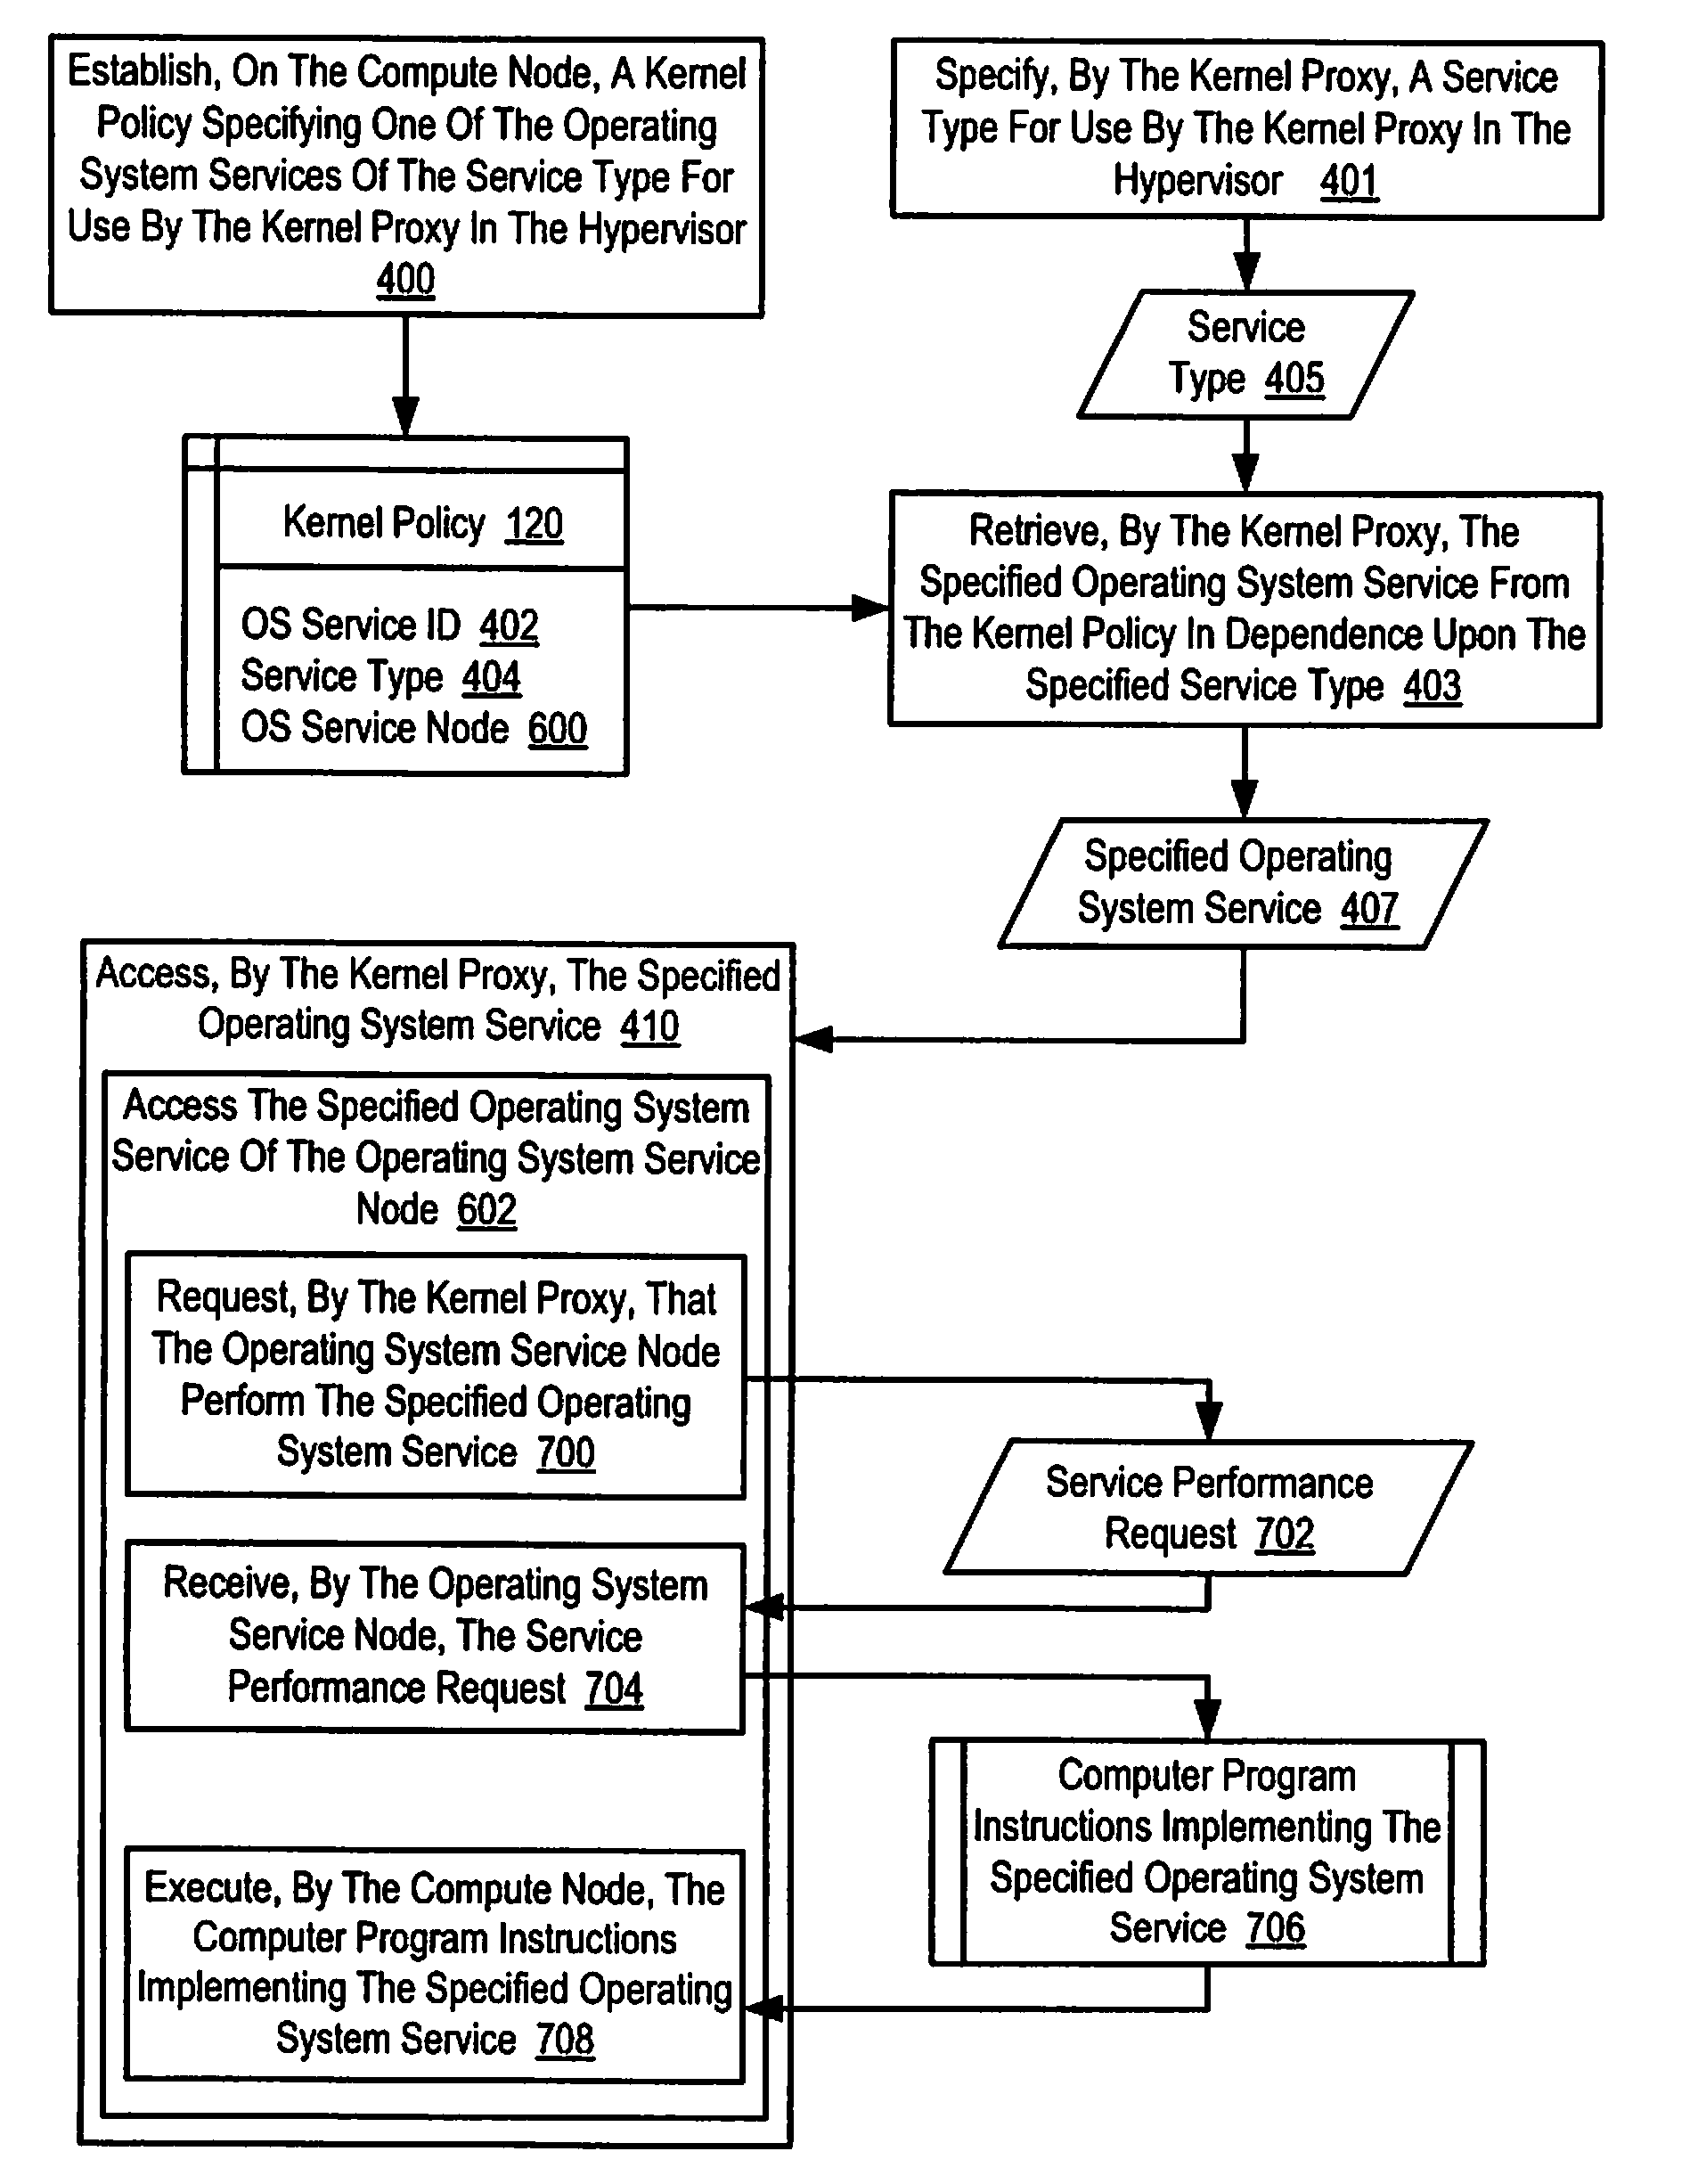 Providing policy-based operating system services in a hypervisor on a computing system